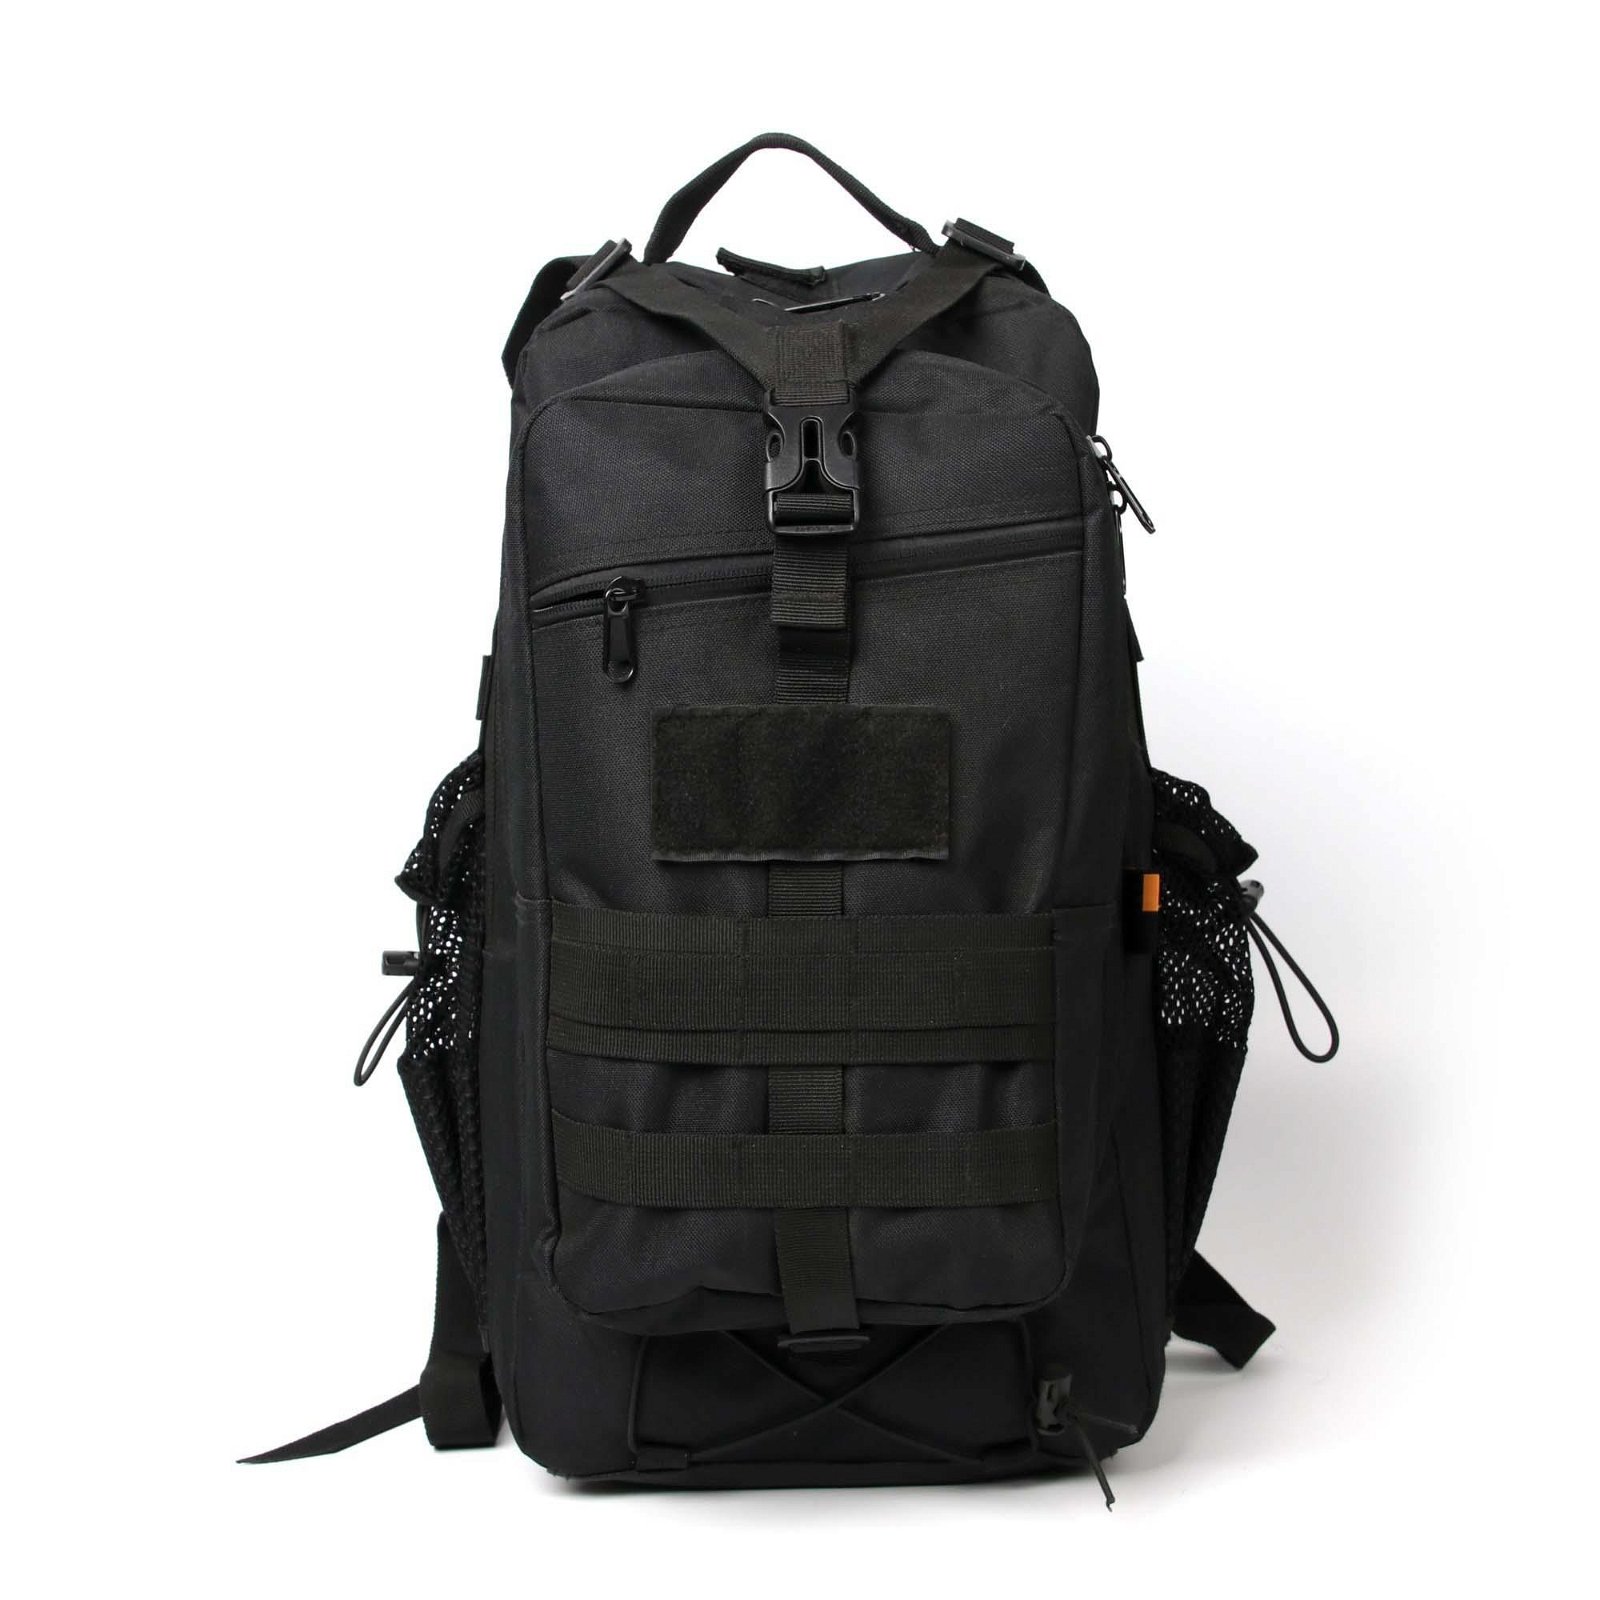 GP-HB050 NEW 3P Backpack,Outdoor Tactical Backpack 2